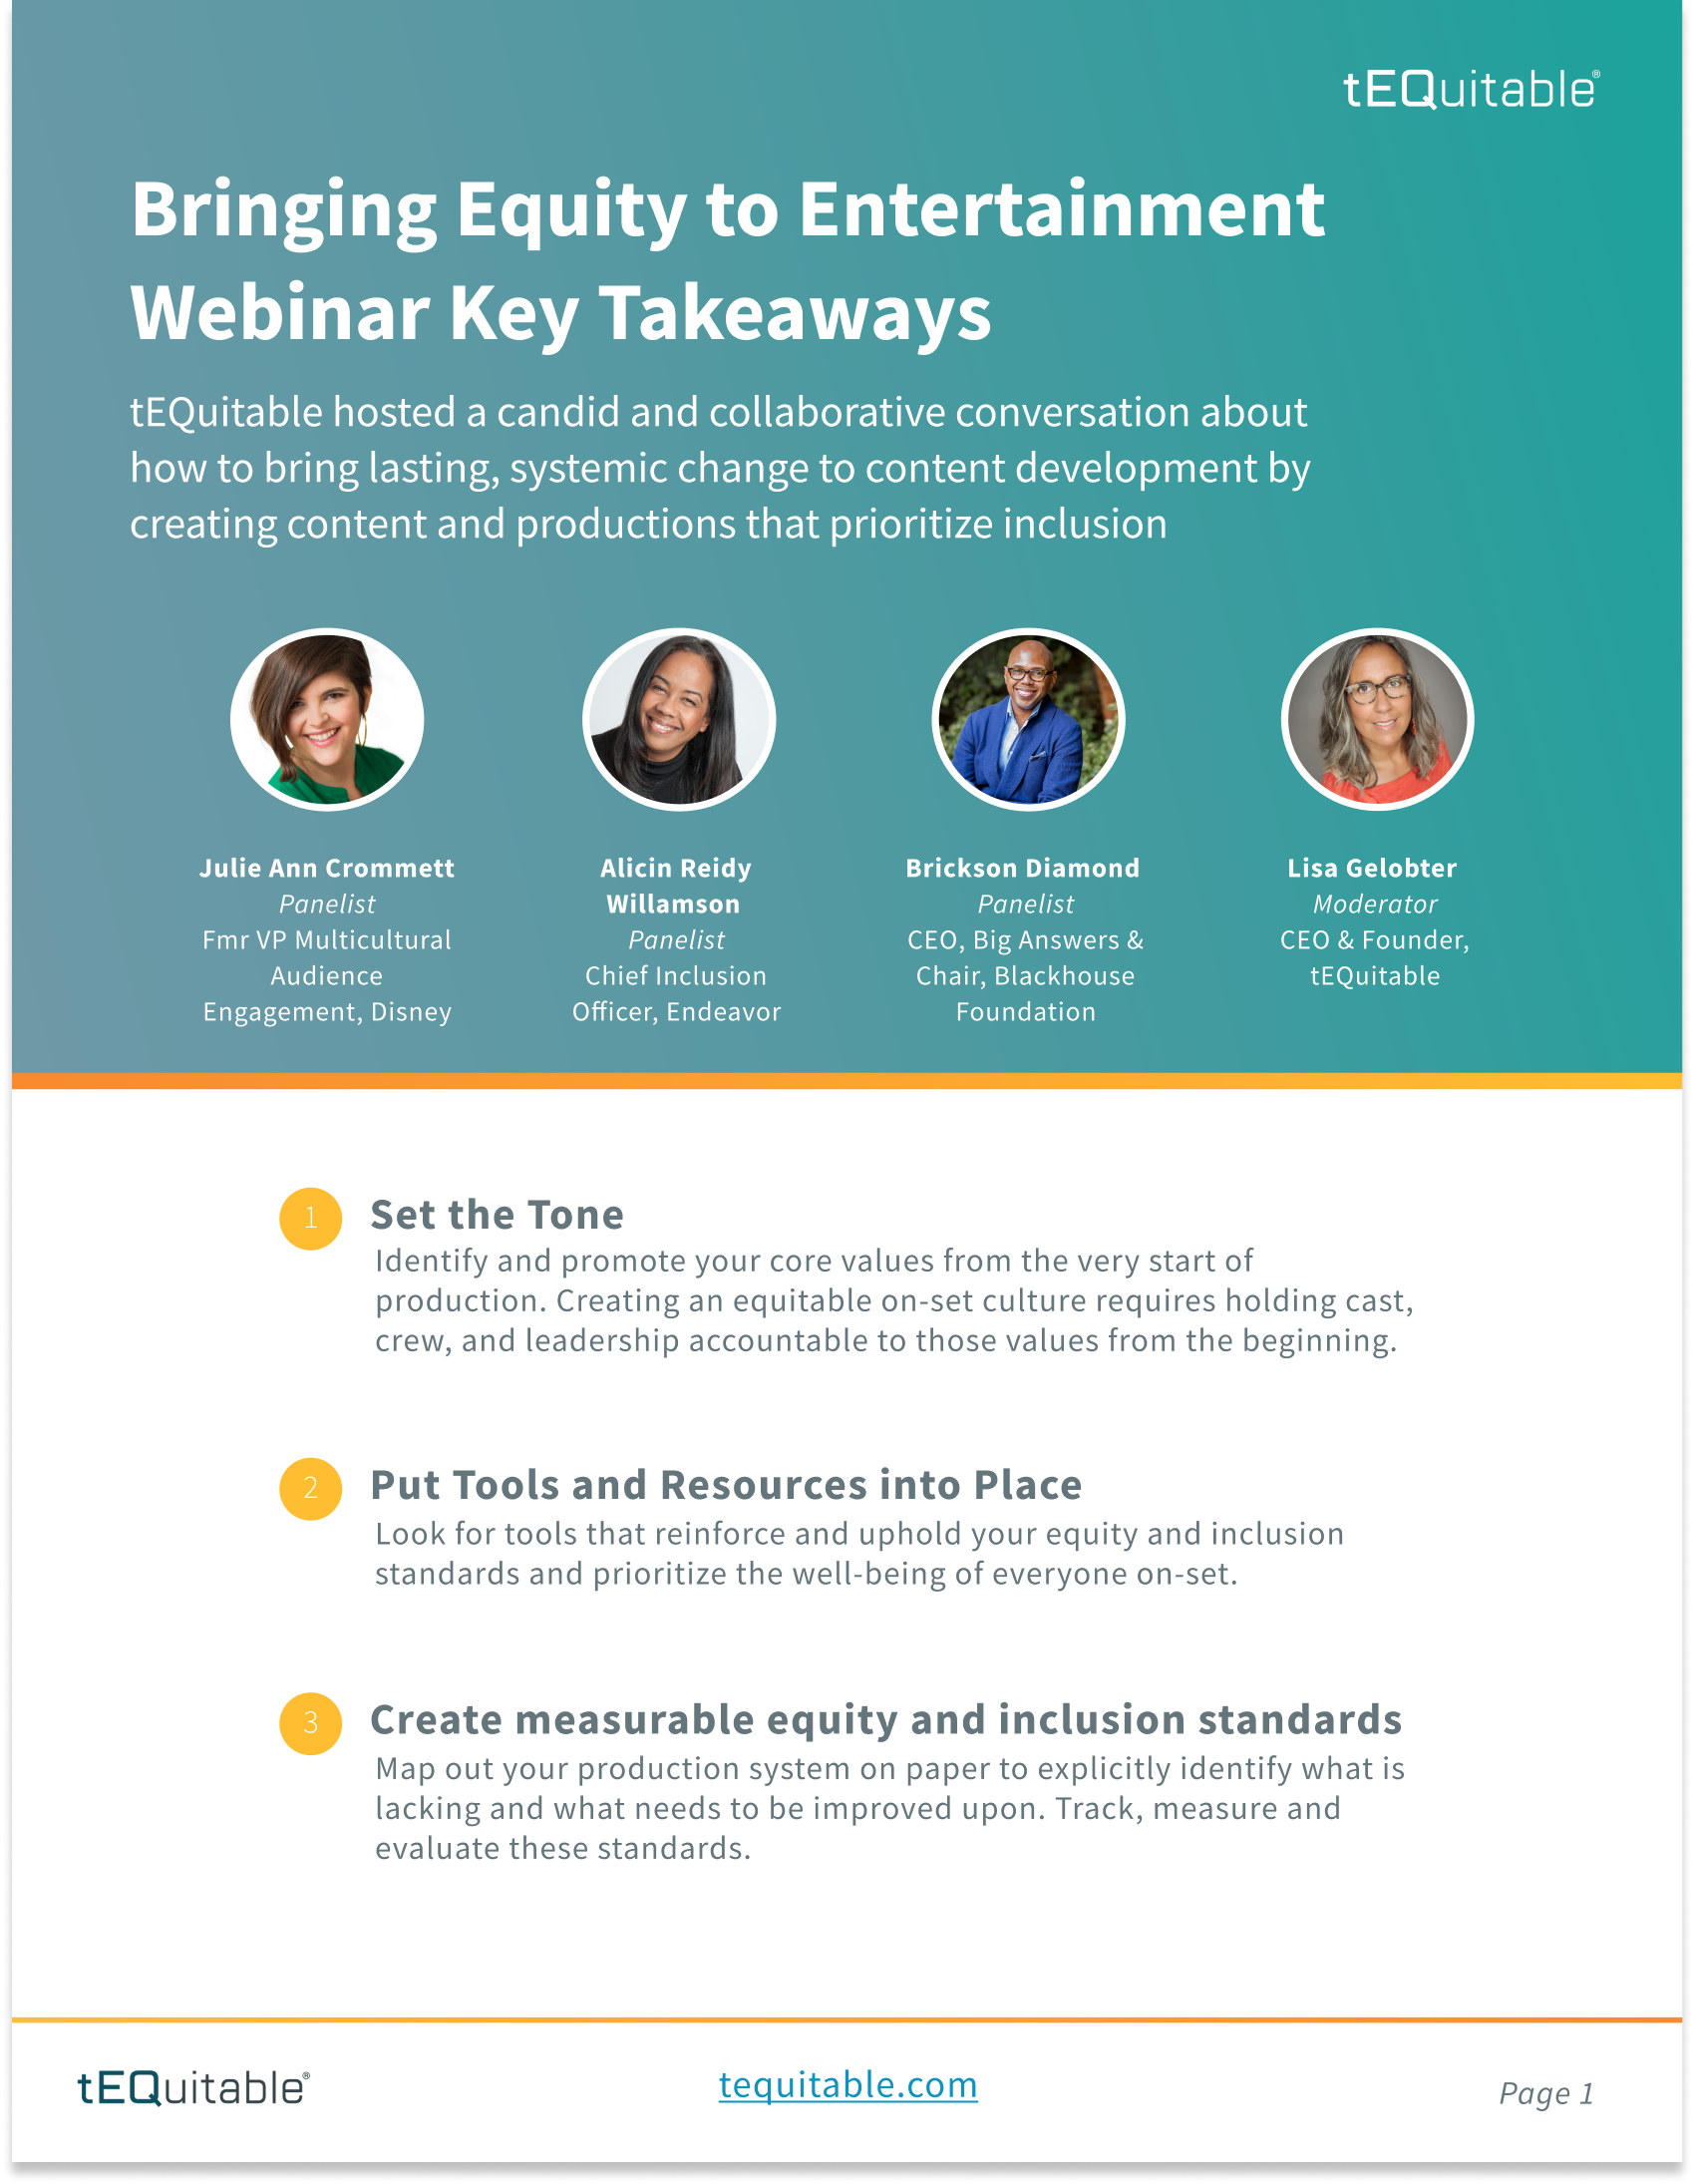 Bringing DEI to Entertainment webinar with Lisa Gelobter